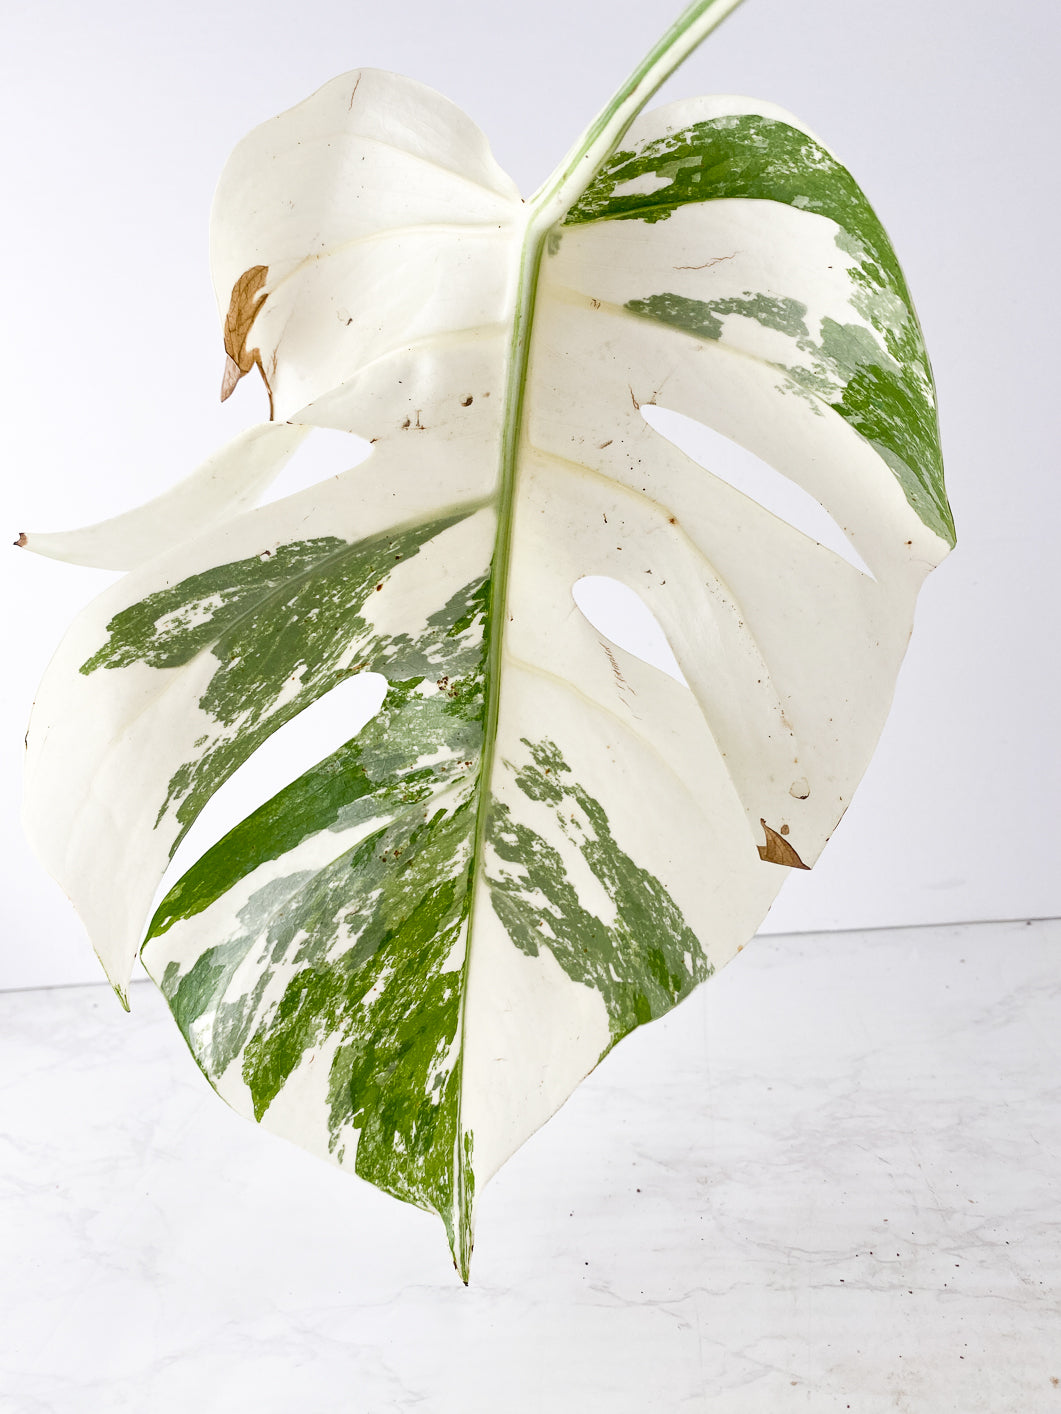 Monstera Albo White Tiger 1 leaf 1 sprout Rooting